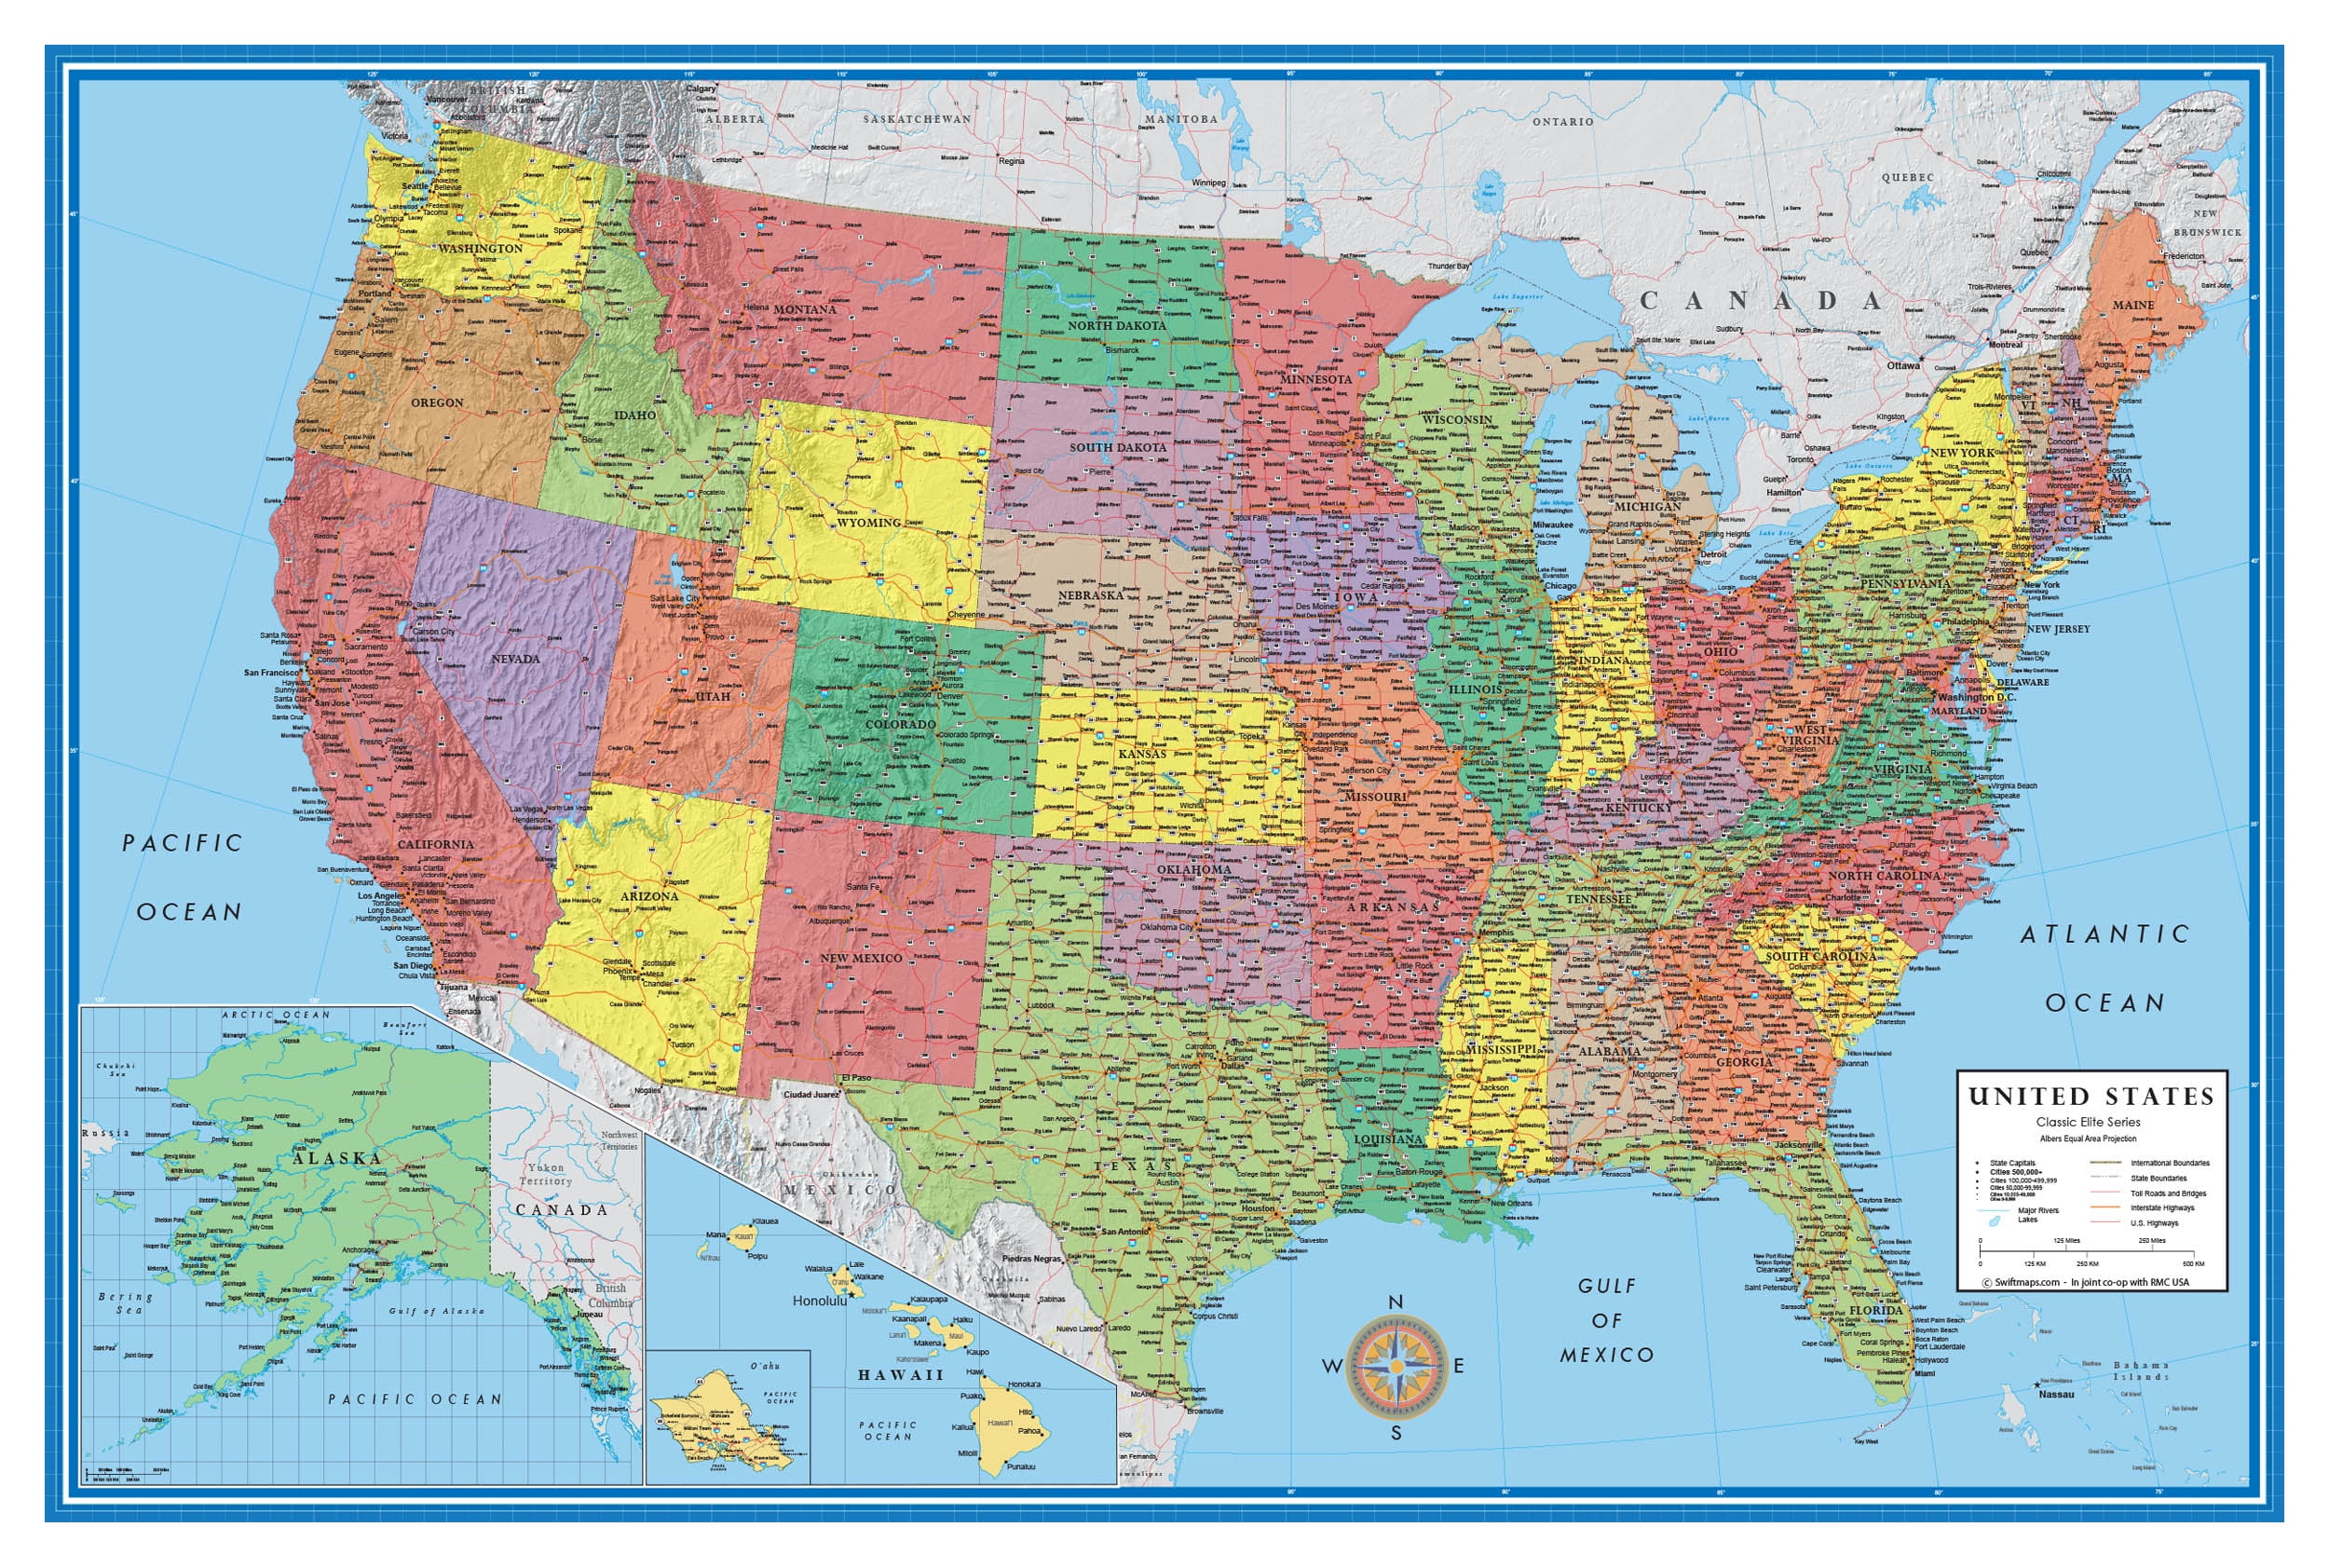 13" x 18" Laminated by American Geographics 5-Map Pack US and World Desk Map 